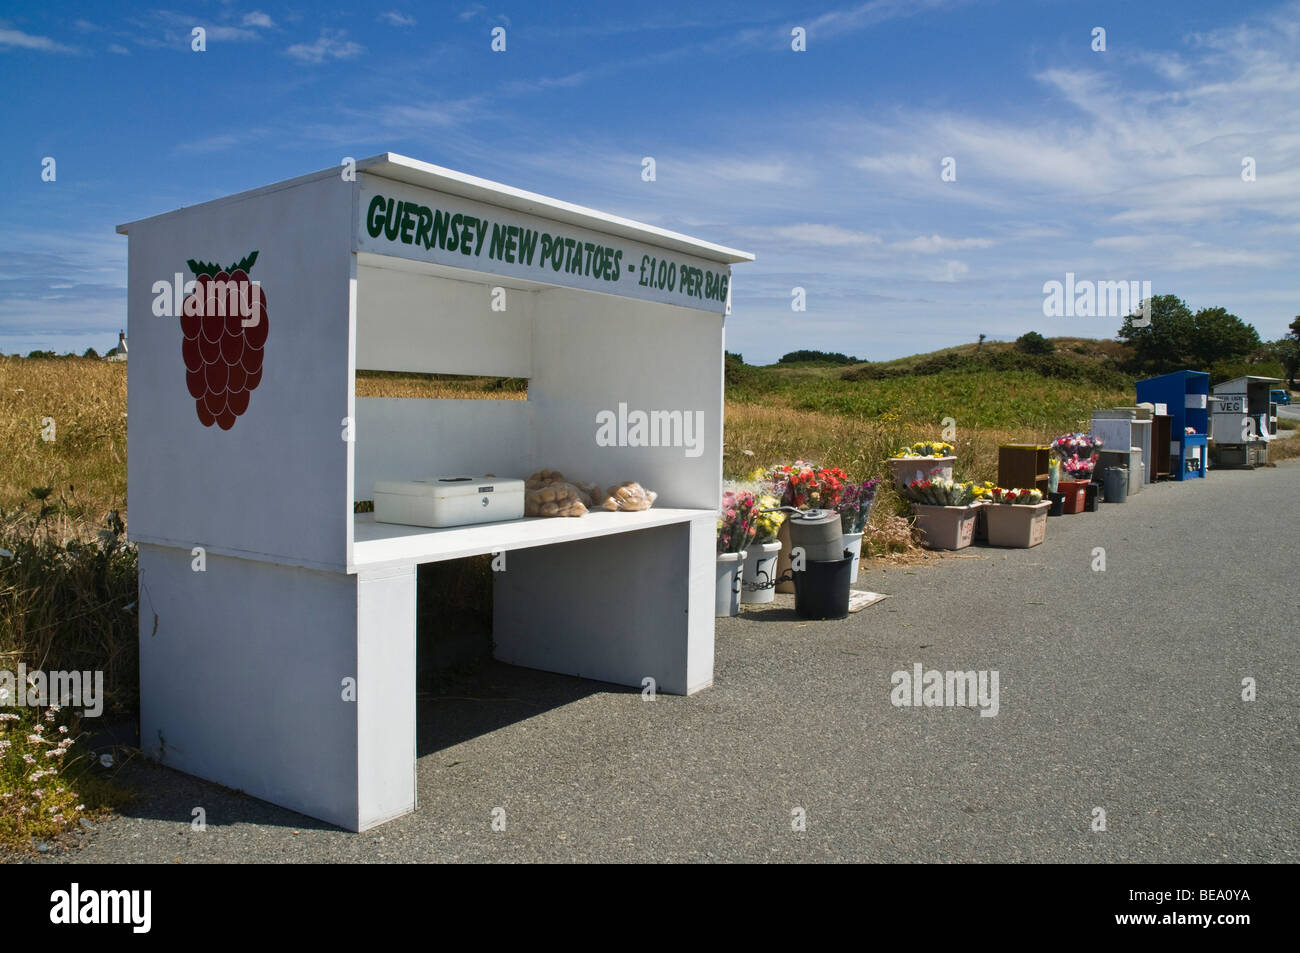 dh  VALE GUERNSEY Local produce at a rural hedge stalls market in Guernsey selling vegetable stall roadside honesty box veg Stock Photo